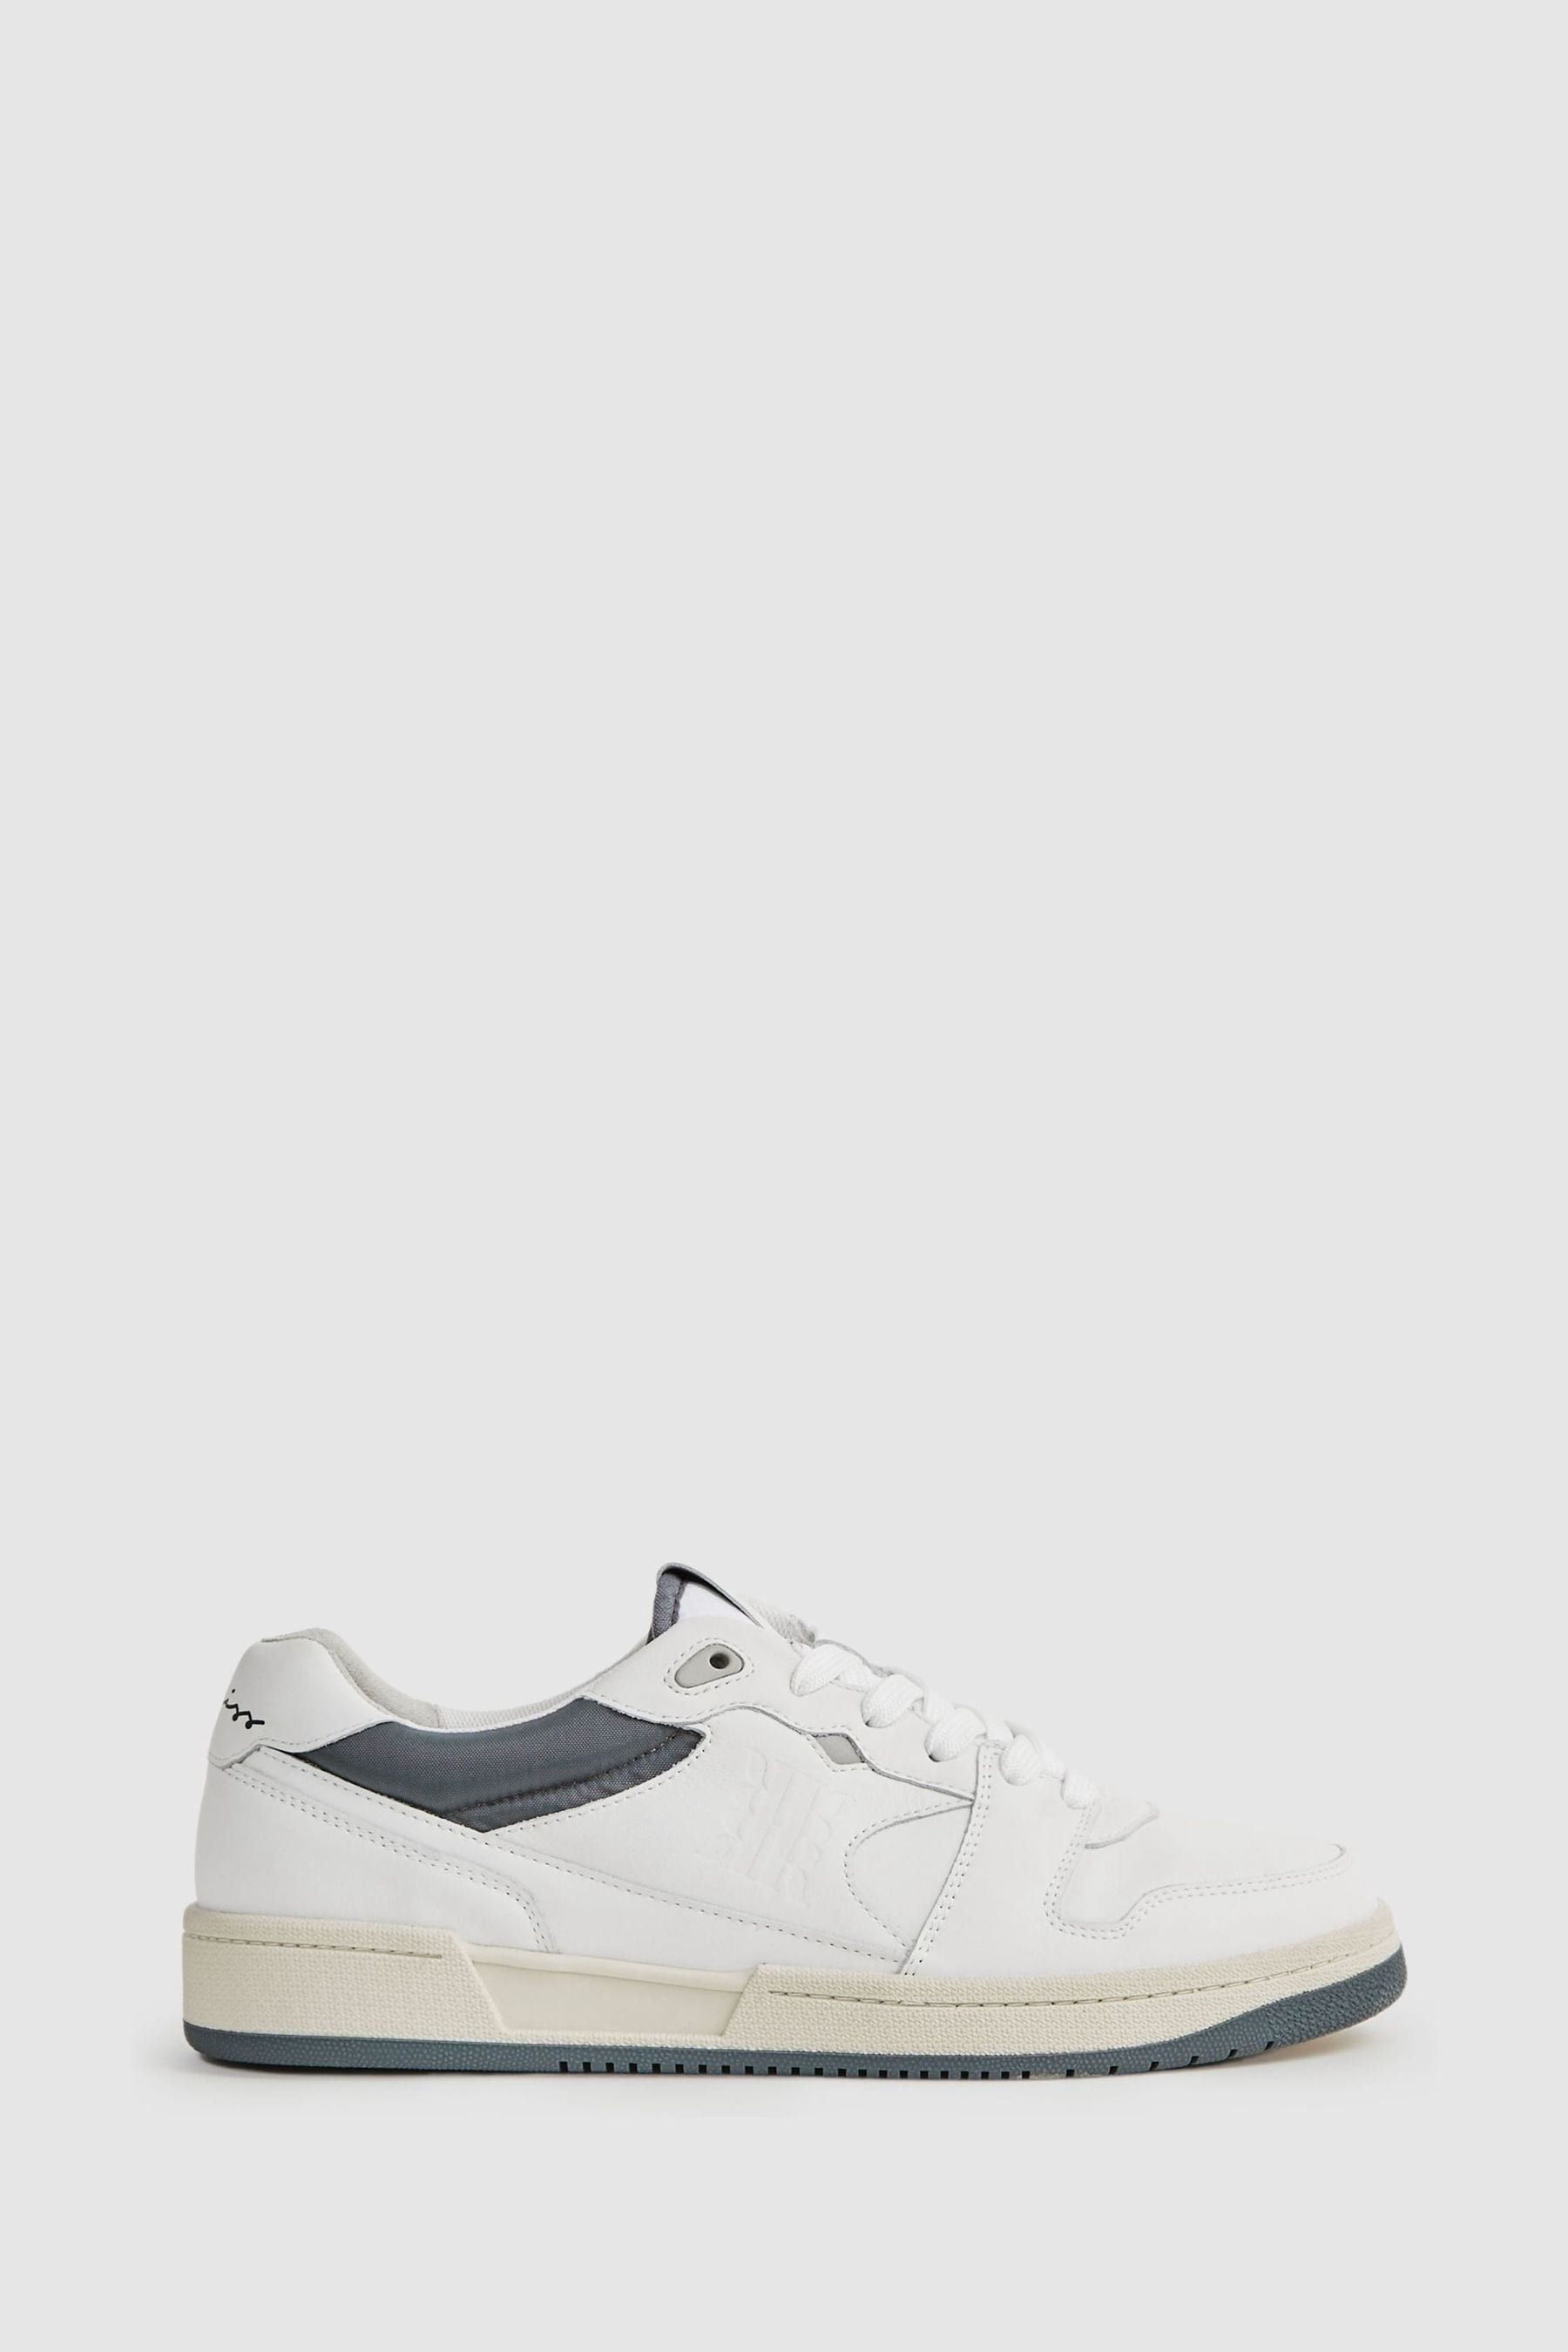 Reiss Astor - White Leather Colourblock Lace-up Trainers, Us 9